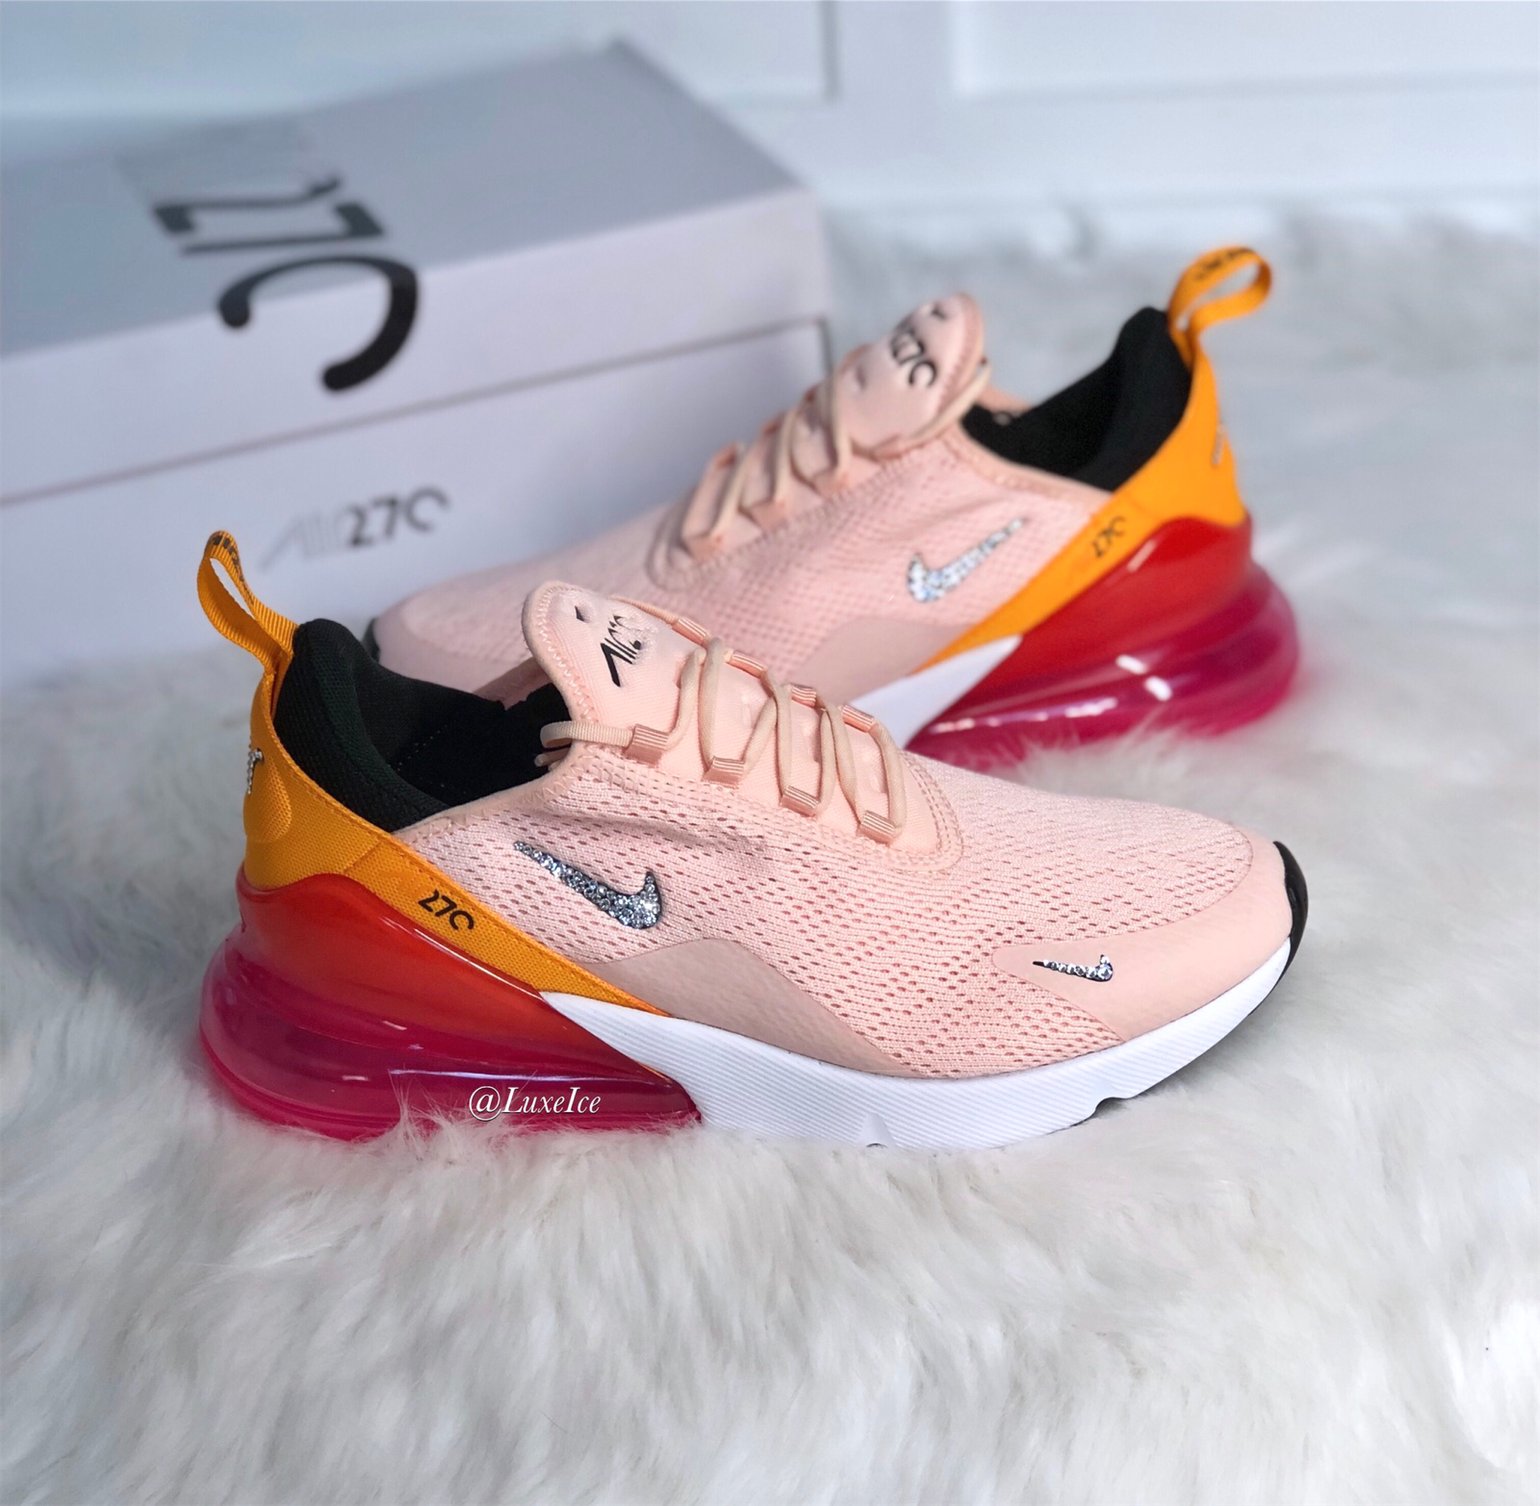 Nike Air Max 270 Womens customized with Swarovski Crystals. Luxe Ice